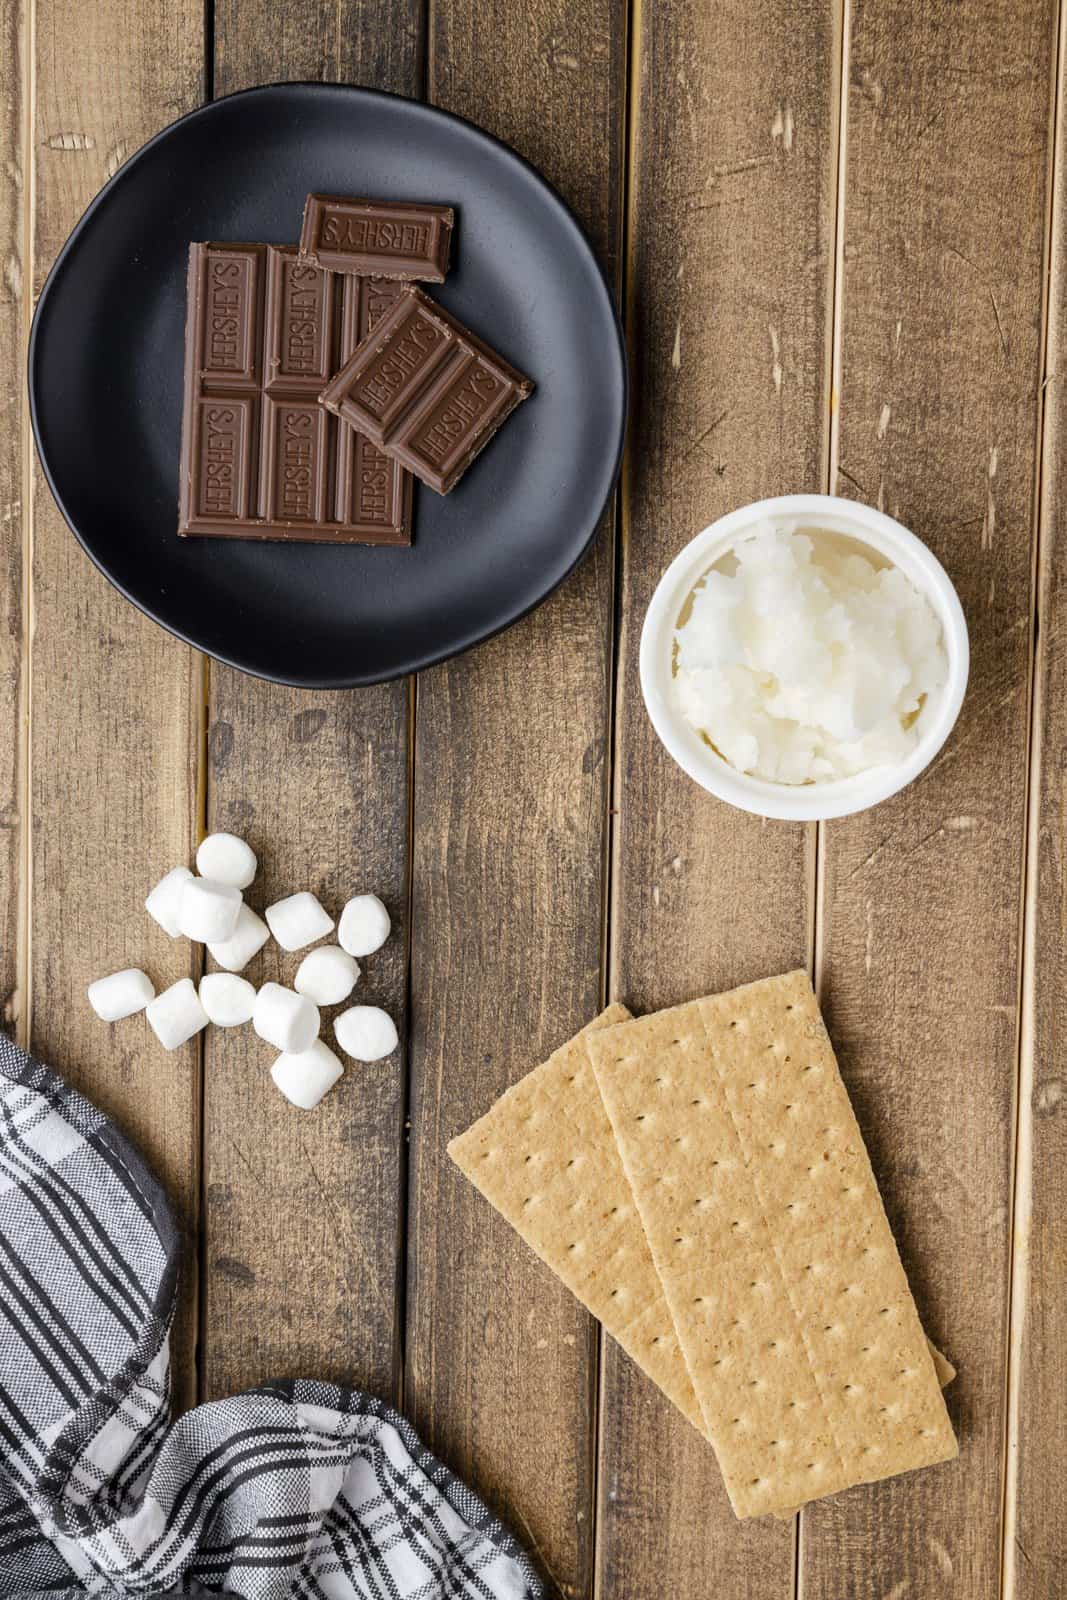 Ingredients needed: milk chocolate, coconut oil, mini marshmallows and graham crackers.